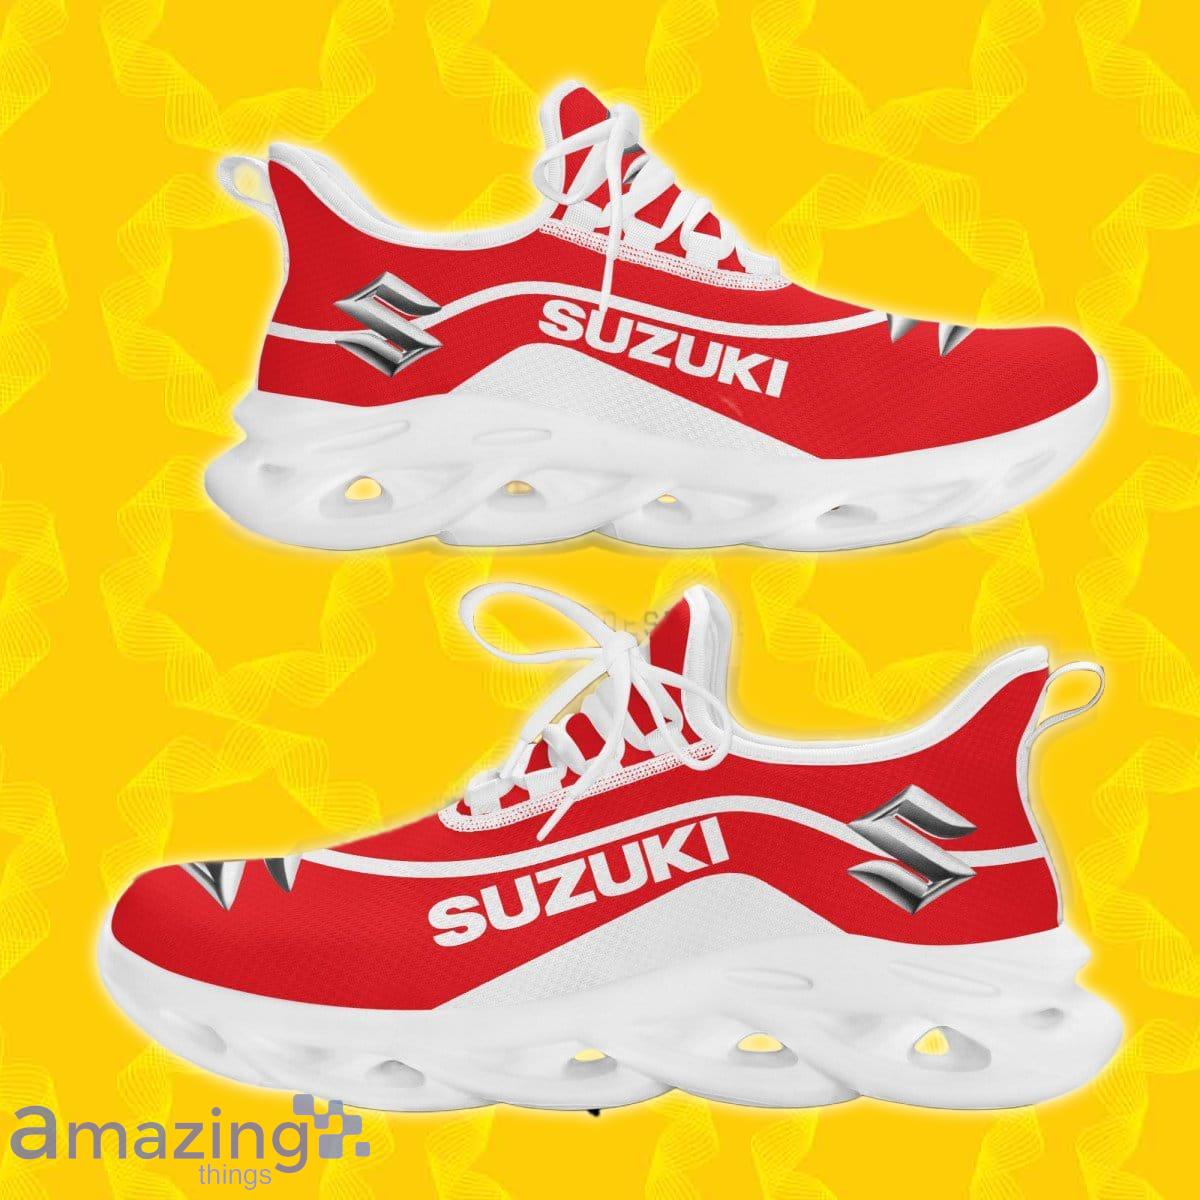 Suzuki Max Soul Shoes Style Gift For Men And Women Product Photo 1